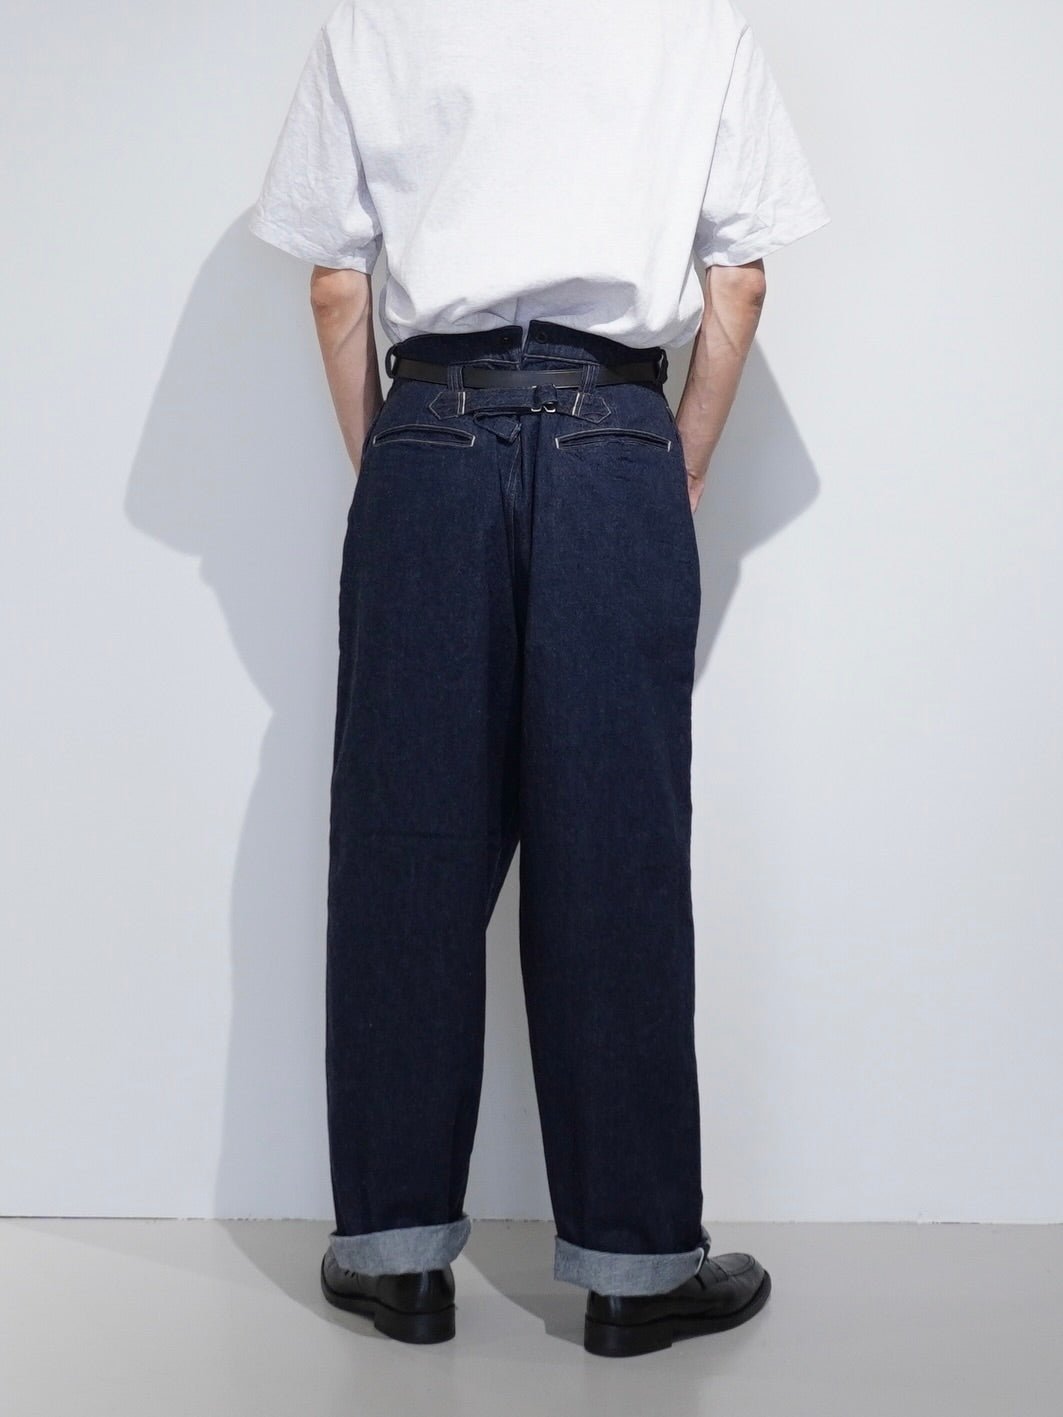 LENO] BUCKLE BACK TROUSERS リノ バックルバック トラウザー